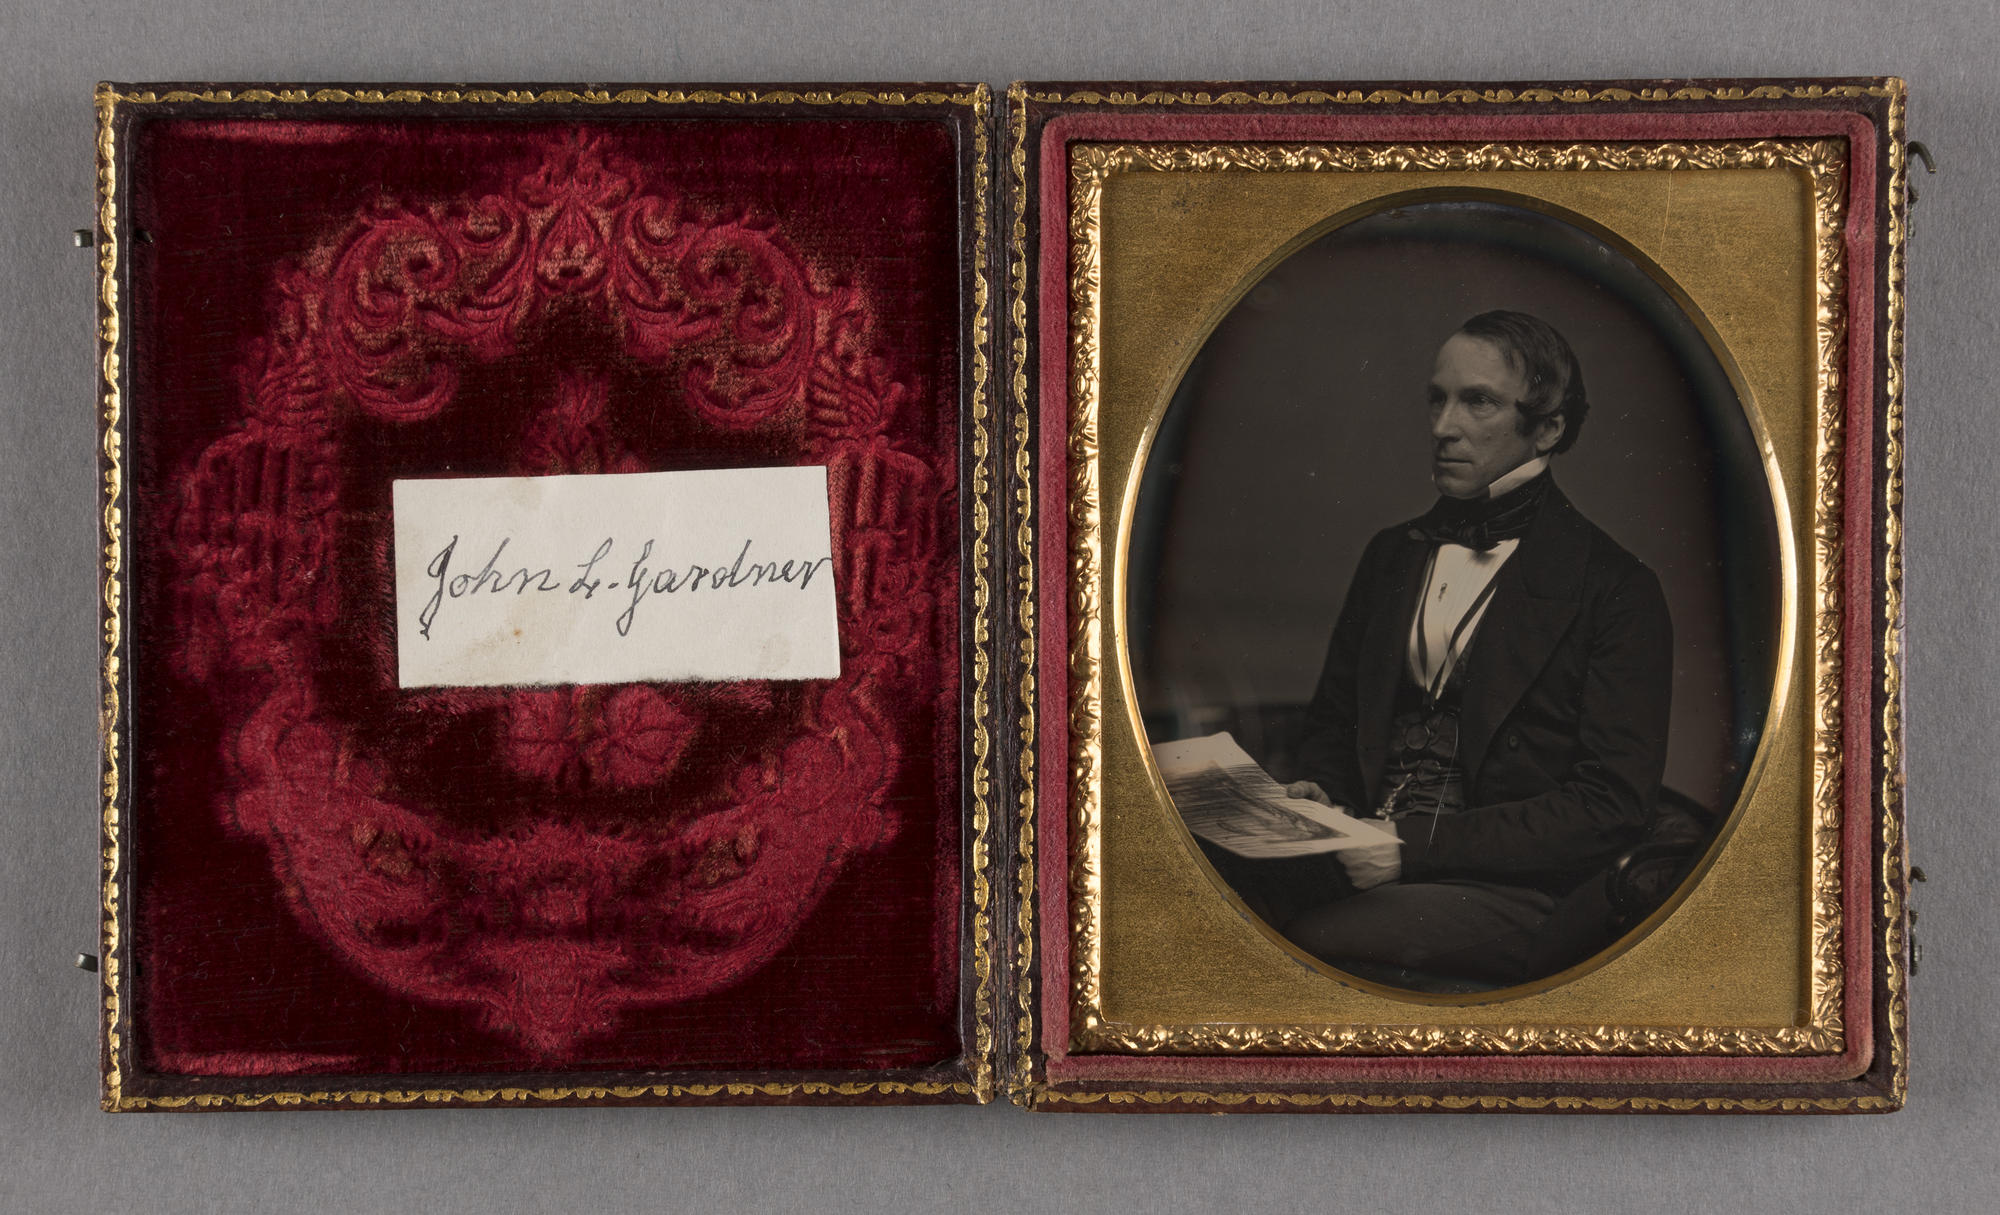 An open case lined with red velvet contains an oval black and white photograph of a middle aged man, identified as John Lowell Gardner Sr.. He is seated and dressed in 19th century attire.